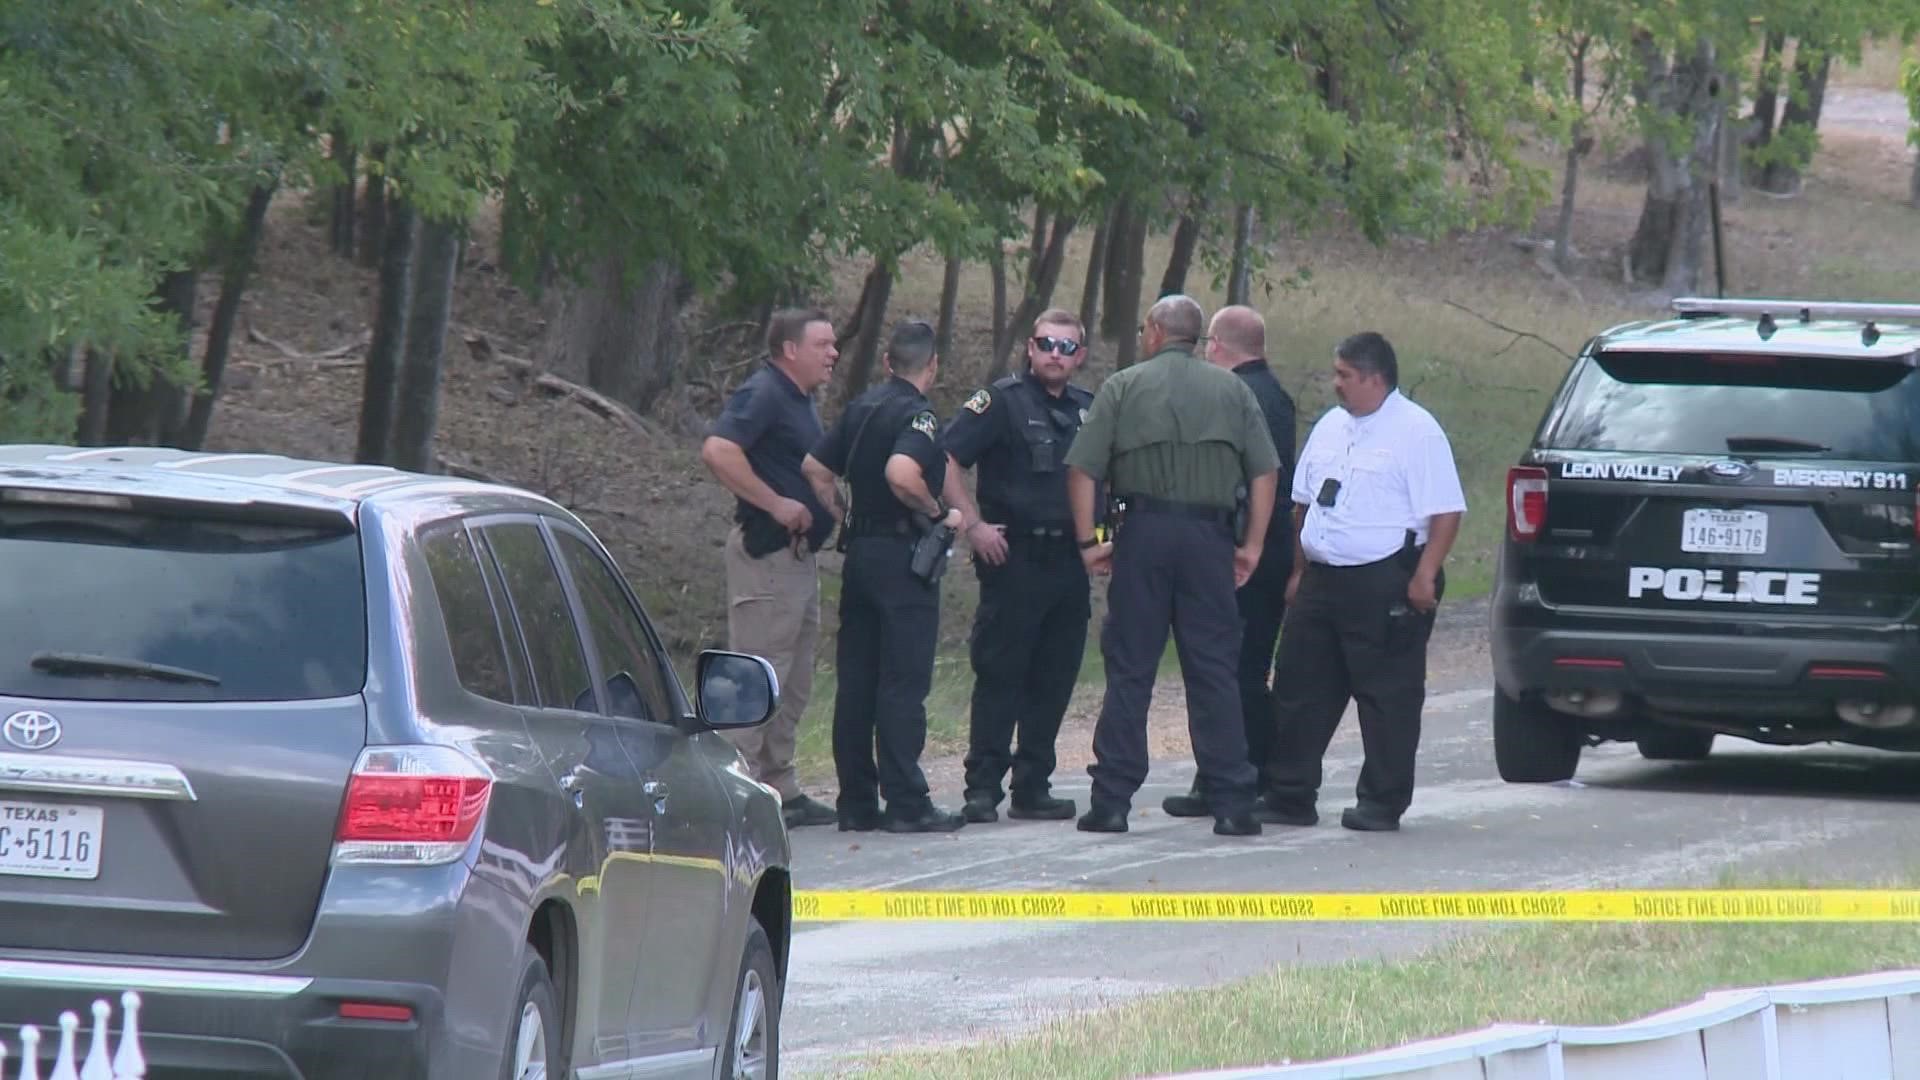 The man was found laying in the road near a car around 10:30 a.m. at Grass Hill Drive at Samaritan Drive.